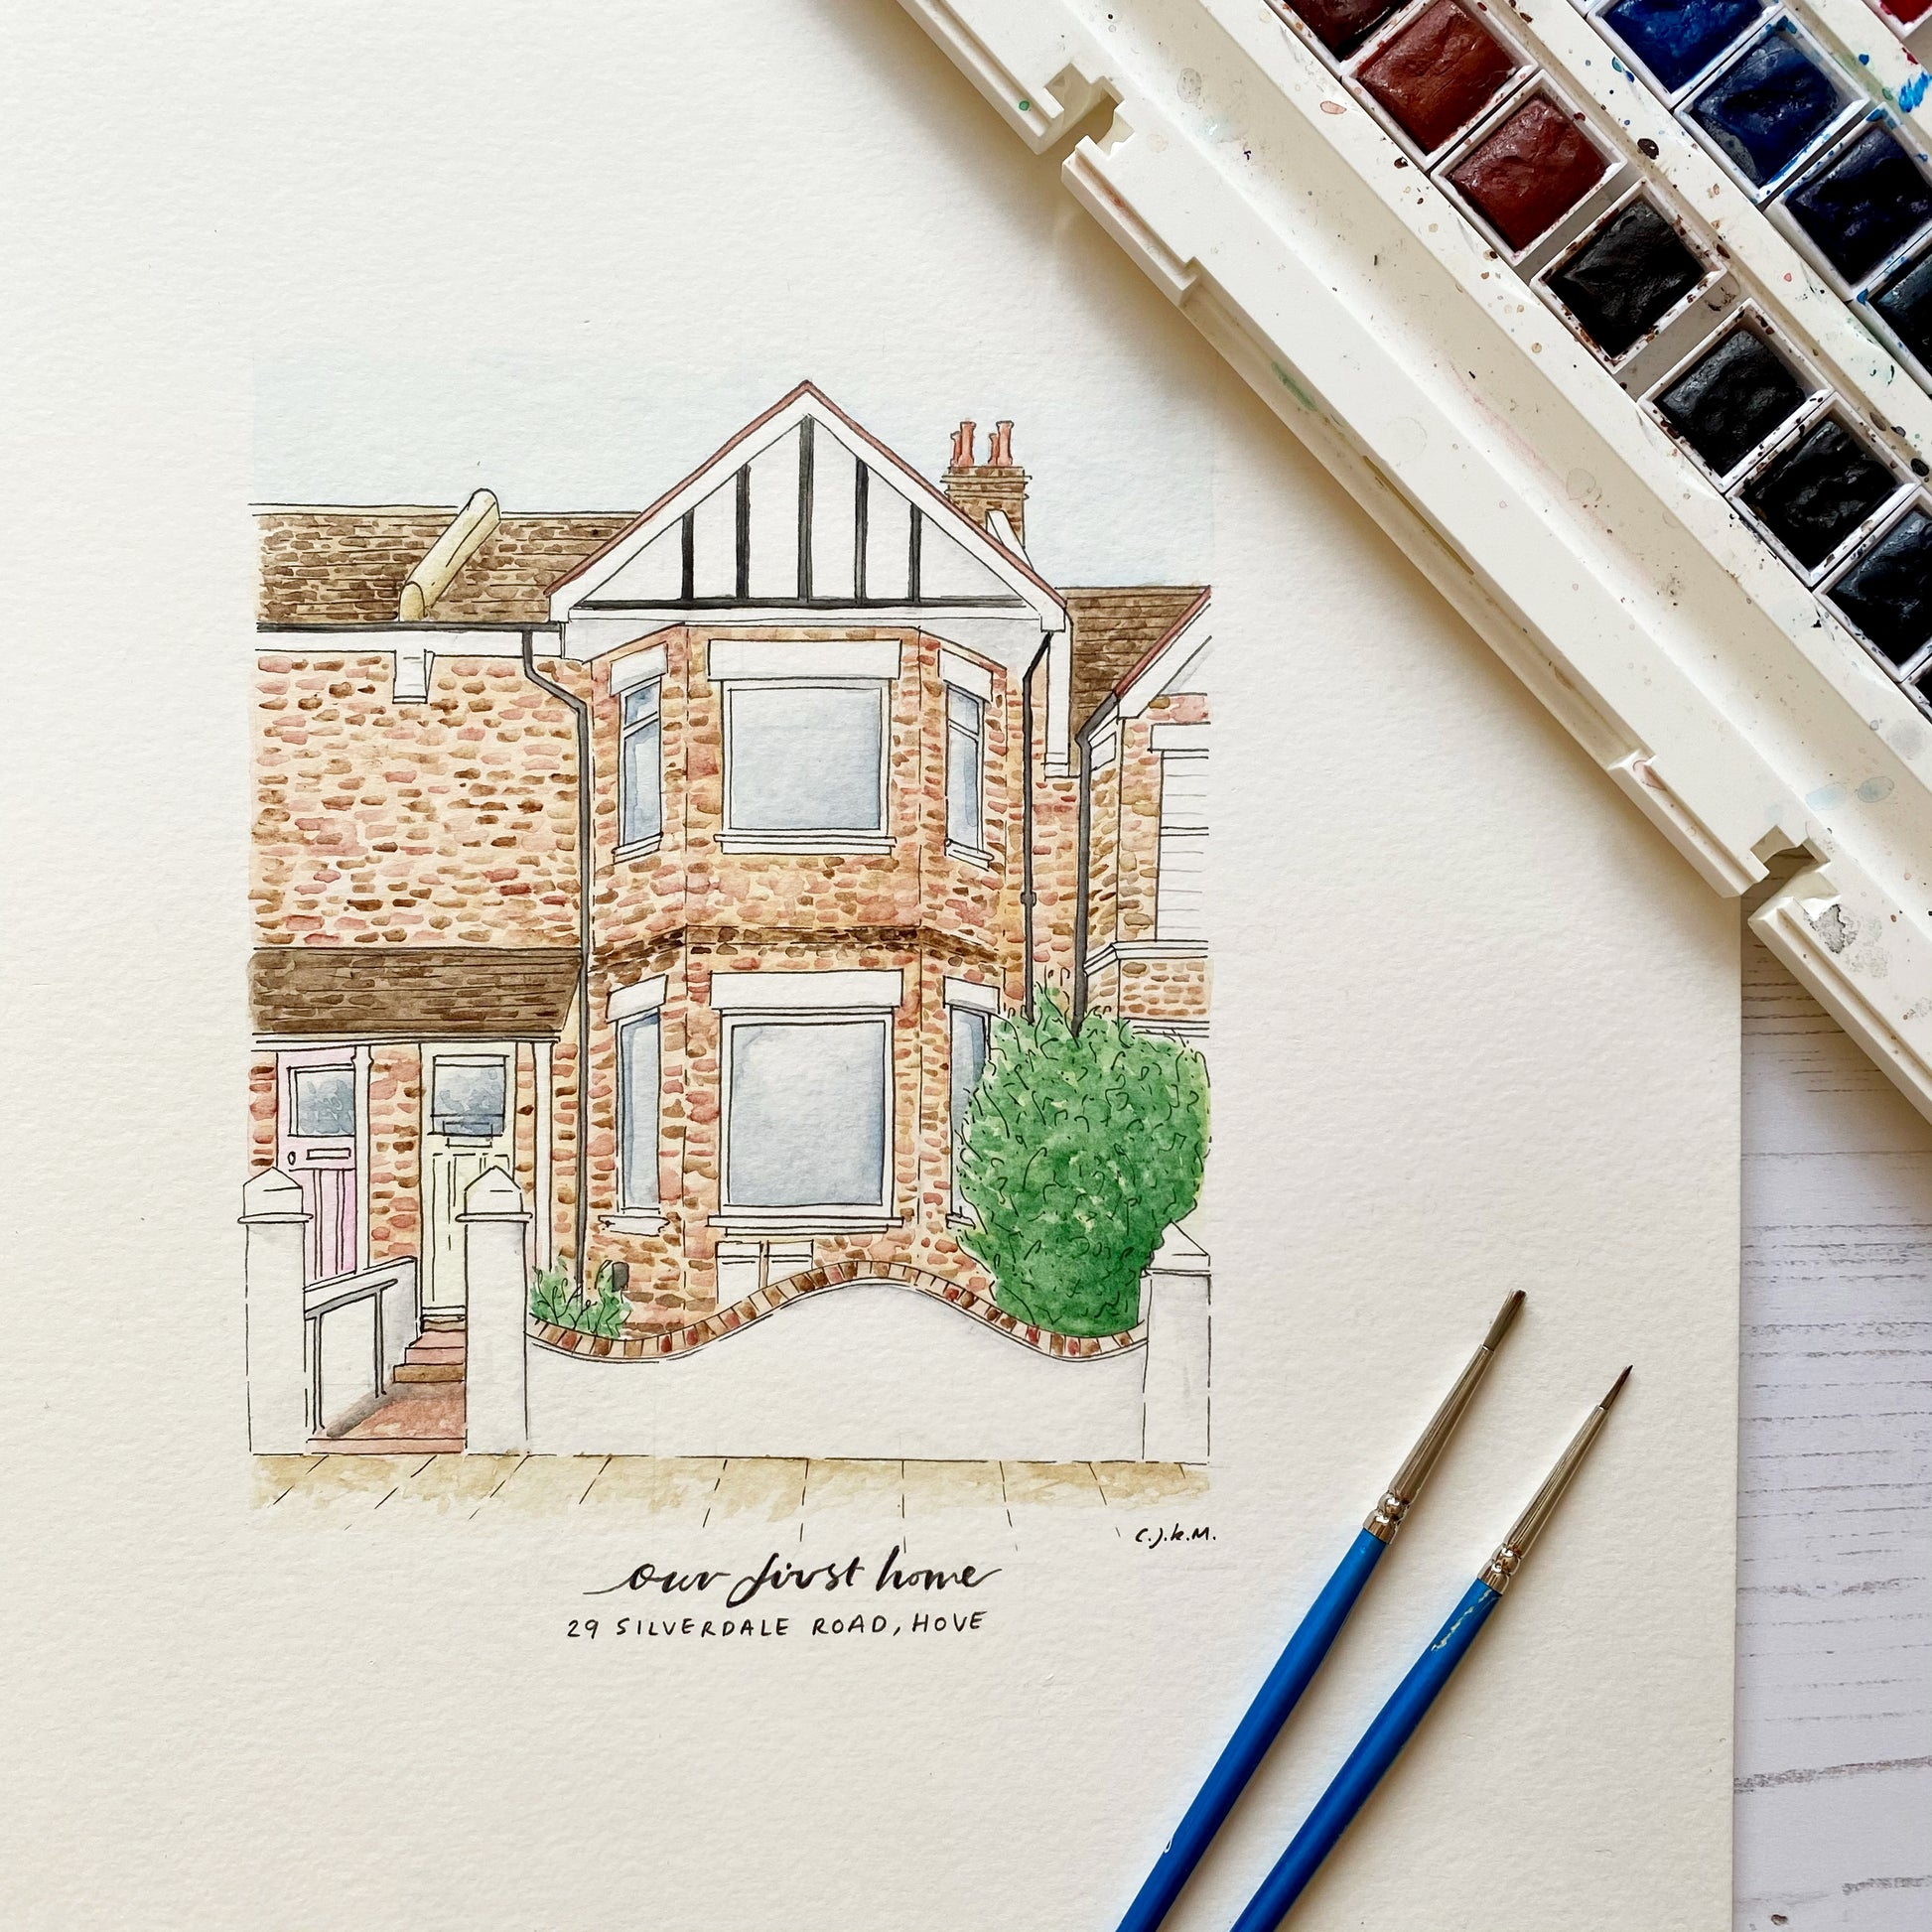 Our first home gift illustration, created using fine liner and watercolour paints of a house in Hove.